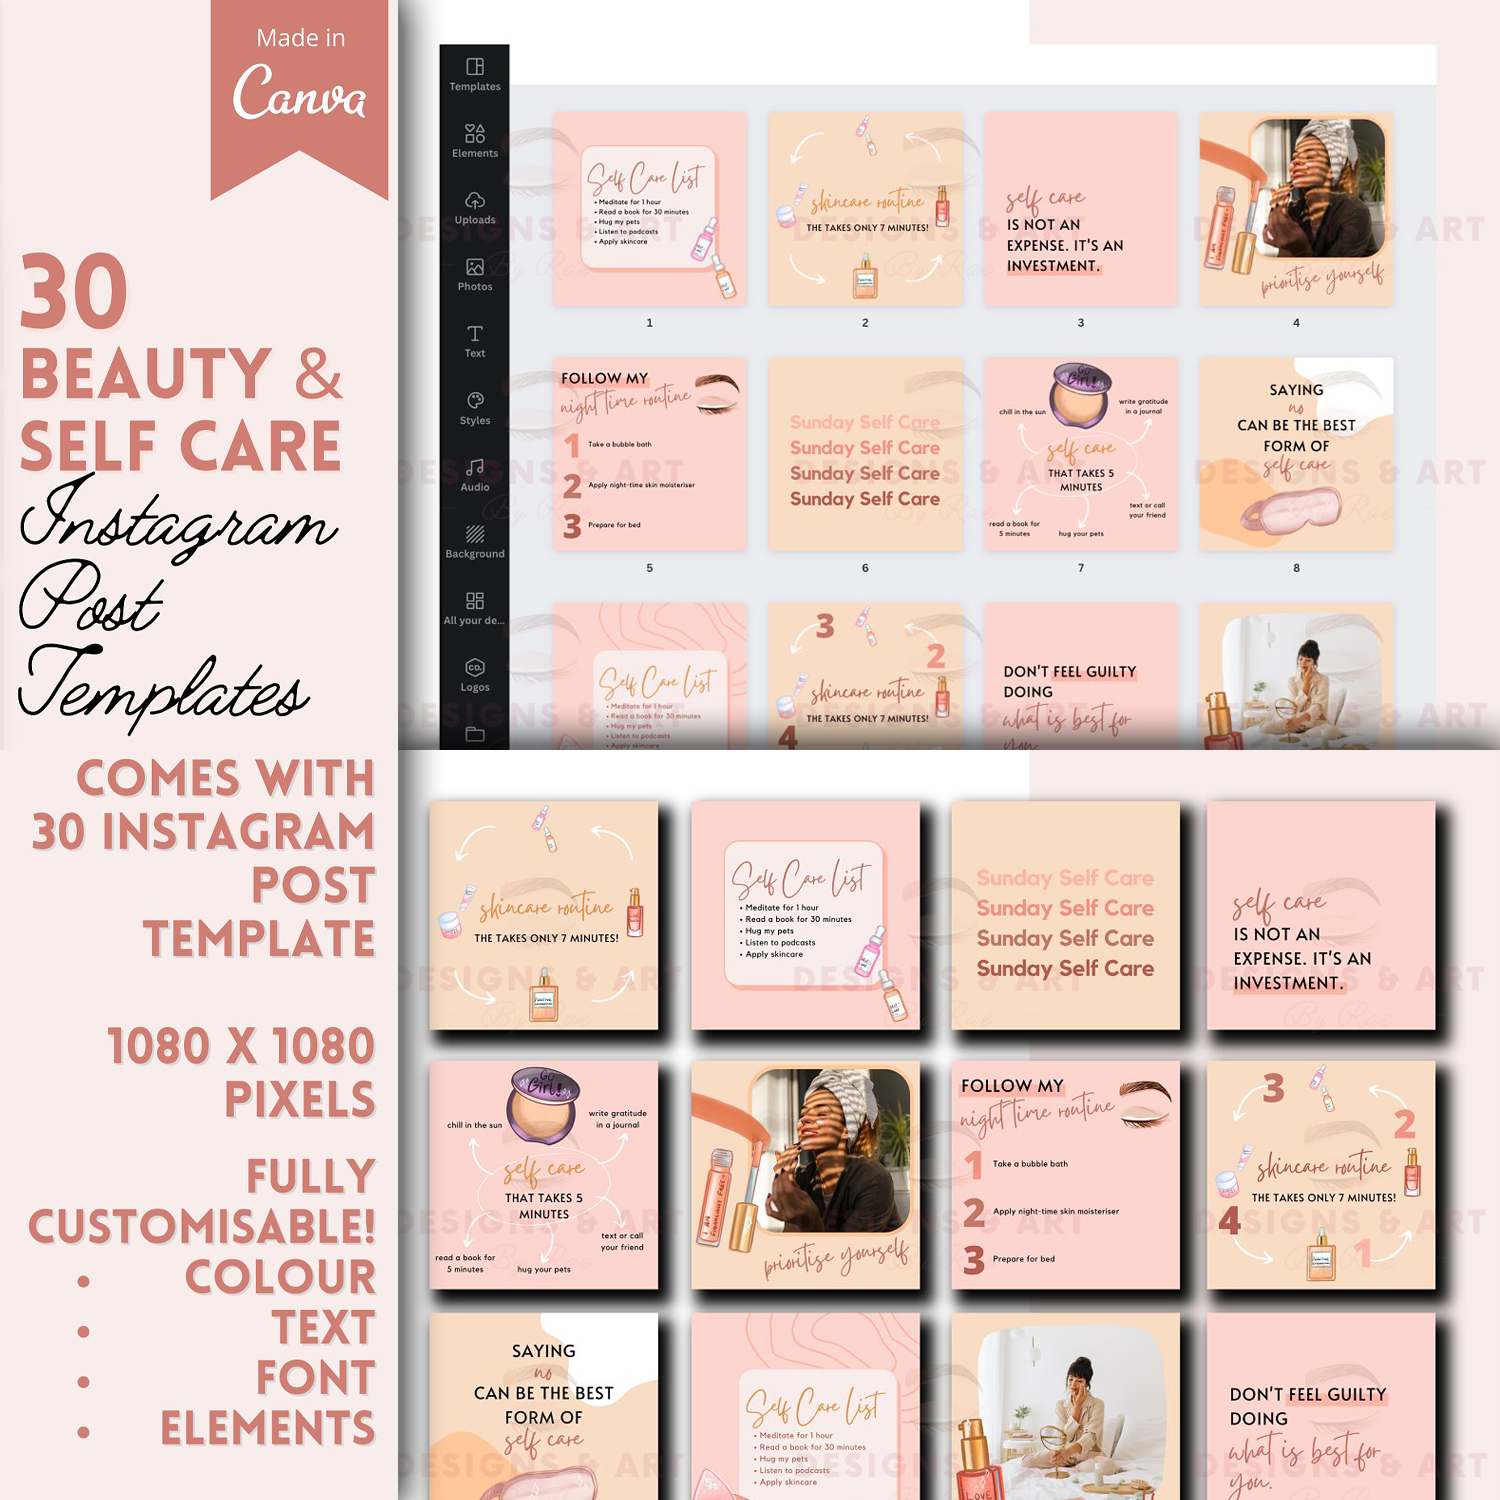 Preview self care instagram post templates.